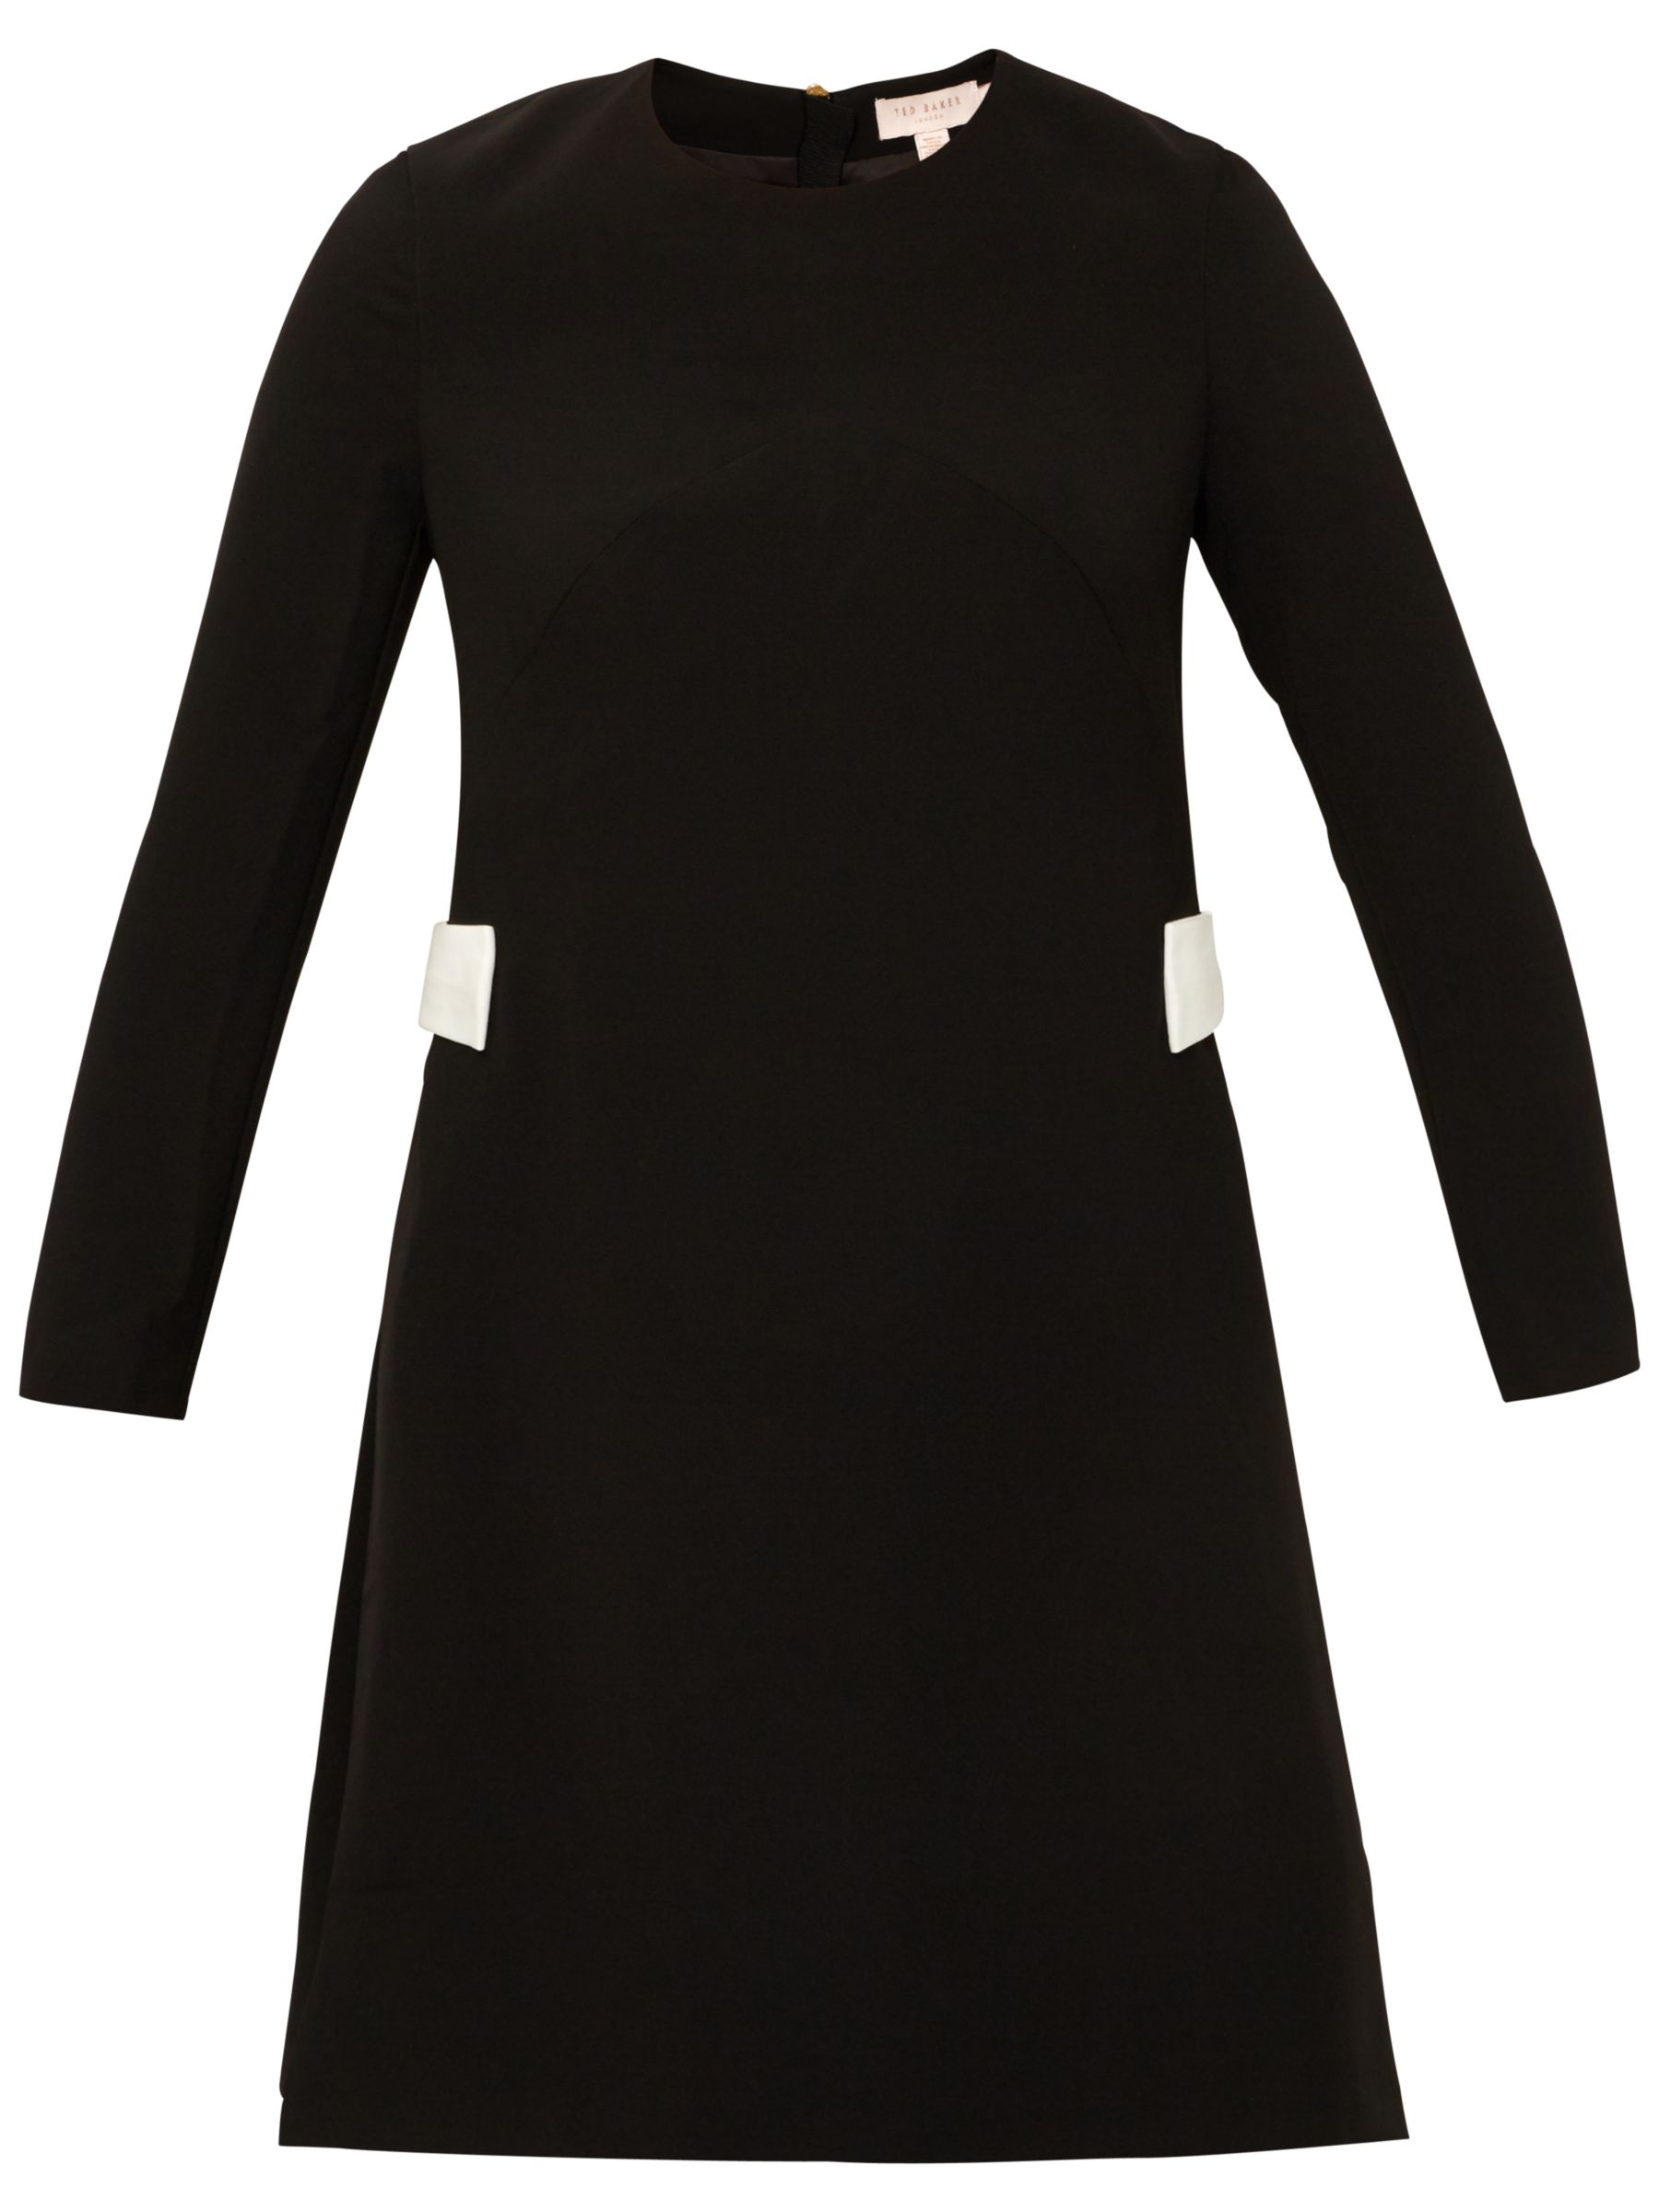 ted baker black dress with white bow